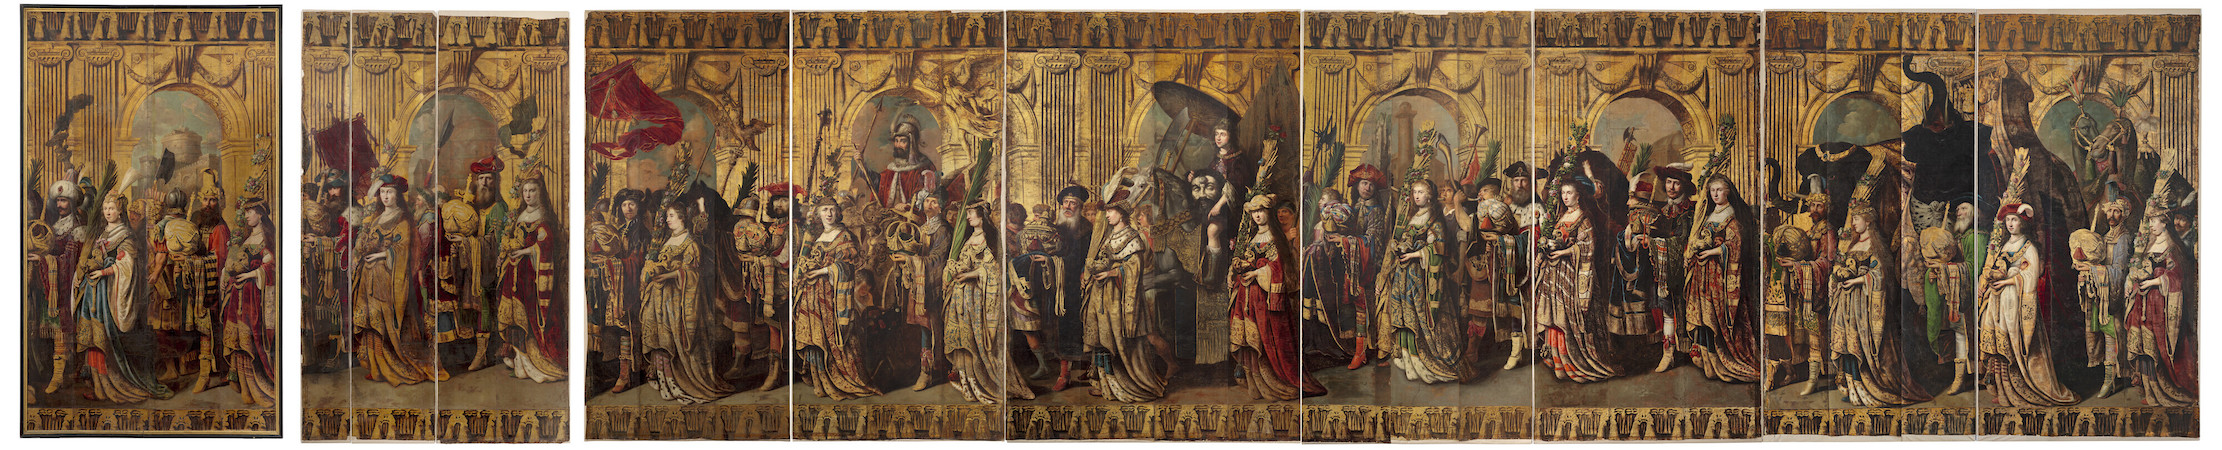 Dutch School, follower of Rembrandt, ‘The Triumph of David,’ set of painted and embossed leather panels laid down on canvas, estimated in the region of $1.5 million. Image courtesy of Christie’s Images Ltd. 2023